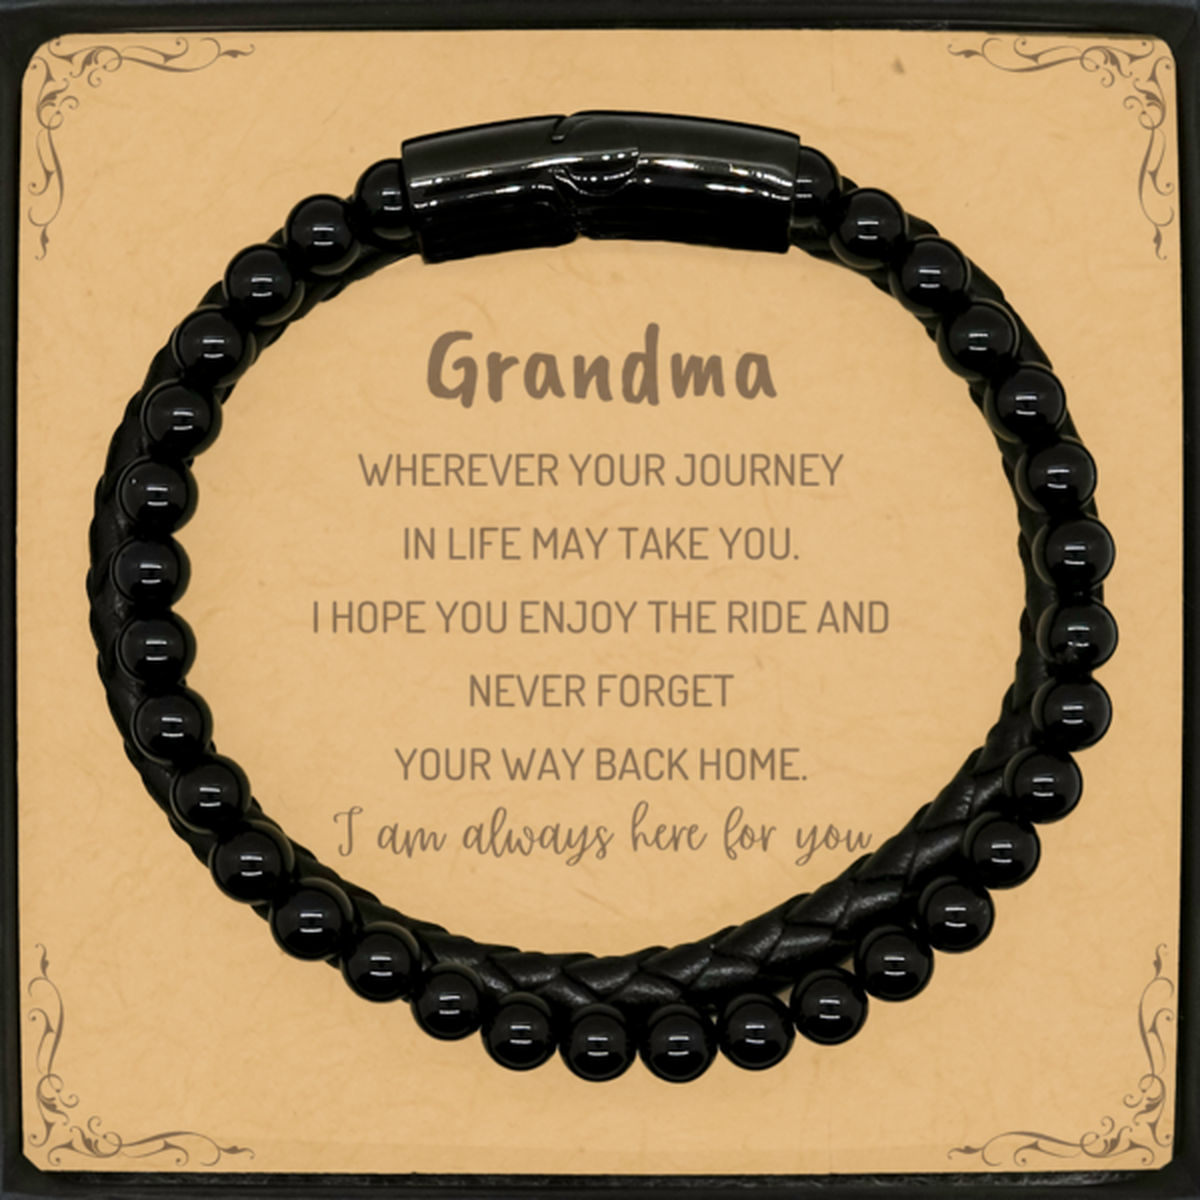 Grandma wherever your journey in life may take you, I am always here for you Grandma Stone Leather Bracelets, Awesome Christmas Gifts For Grandma Message Card, Grandma Birthday Gifts for Men Women Family Loved One